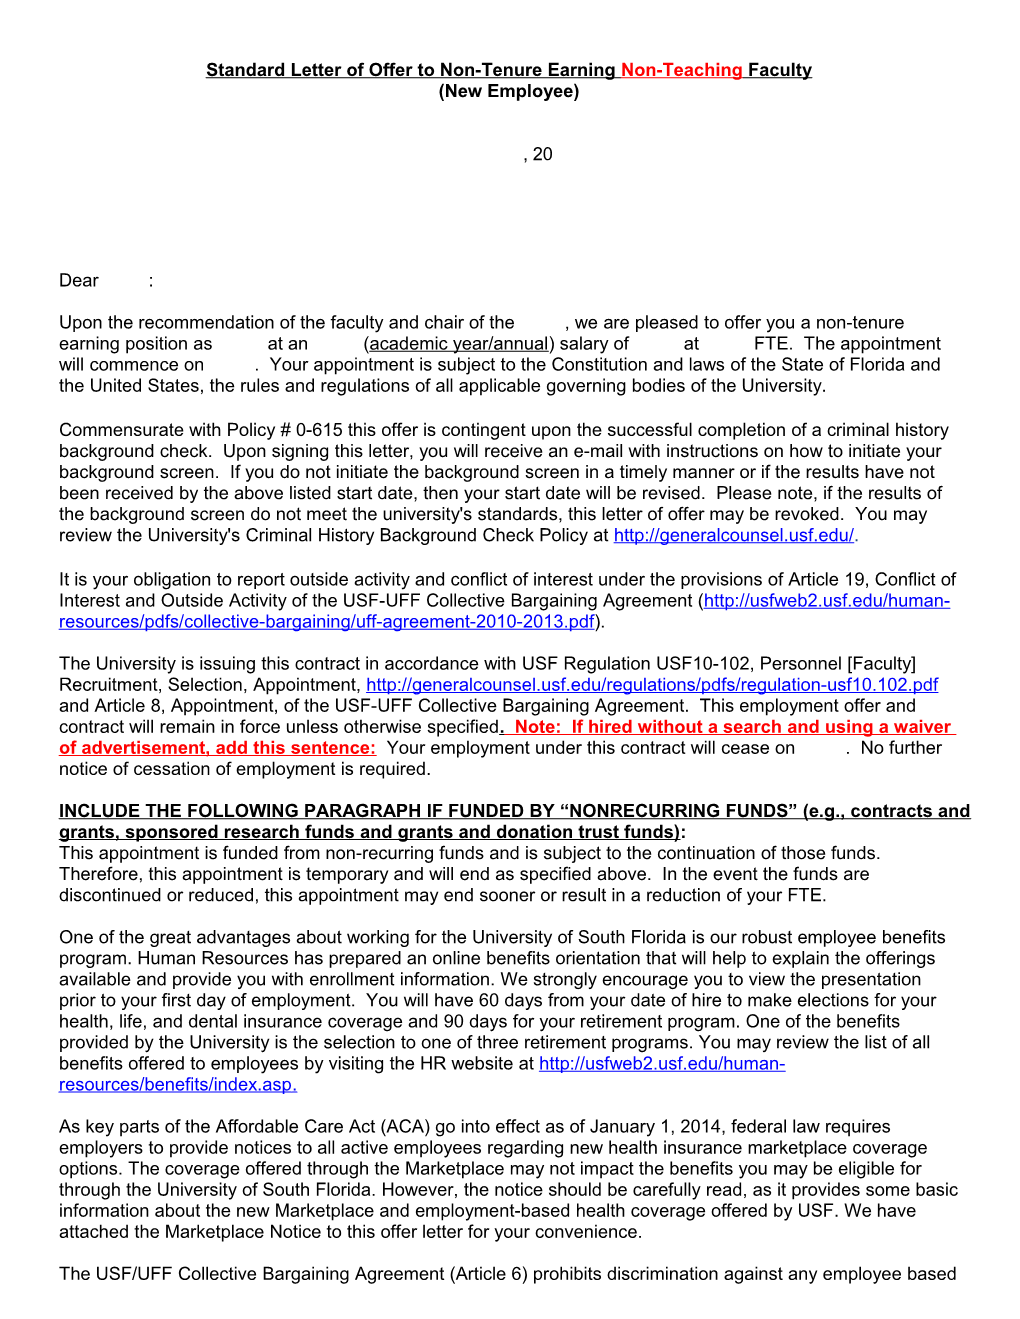 Standard Letter of Offer to Non-Tenure Earning Non-Teaching Faculty